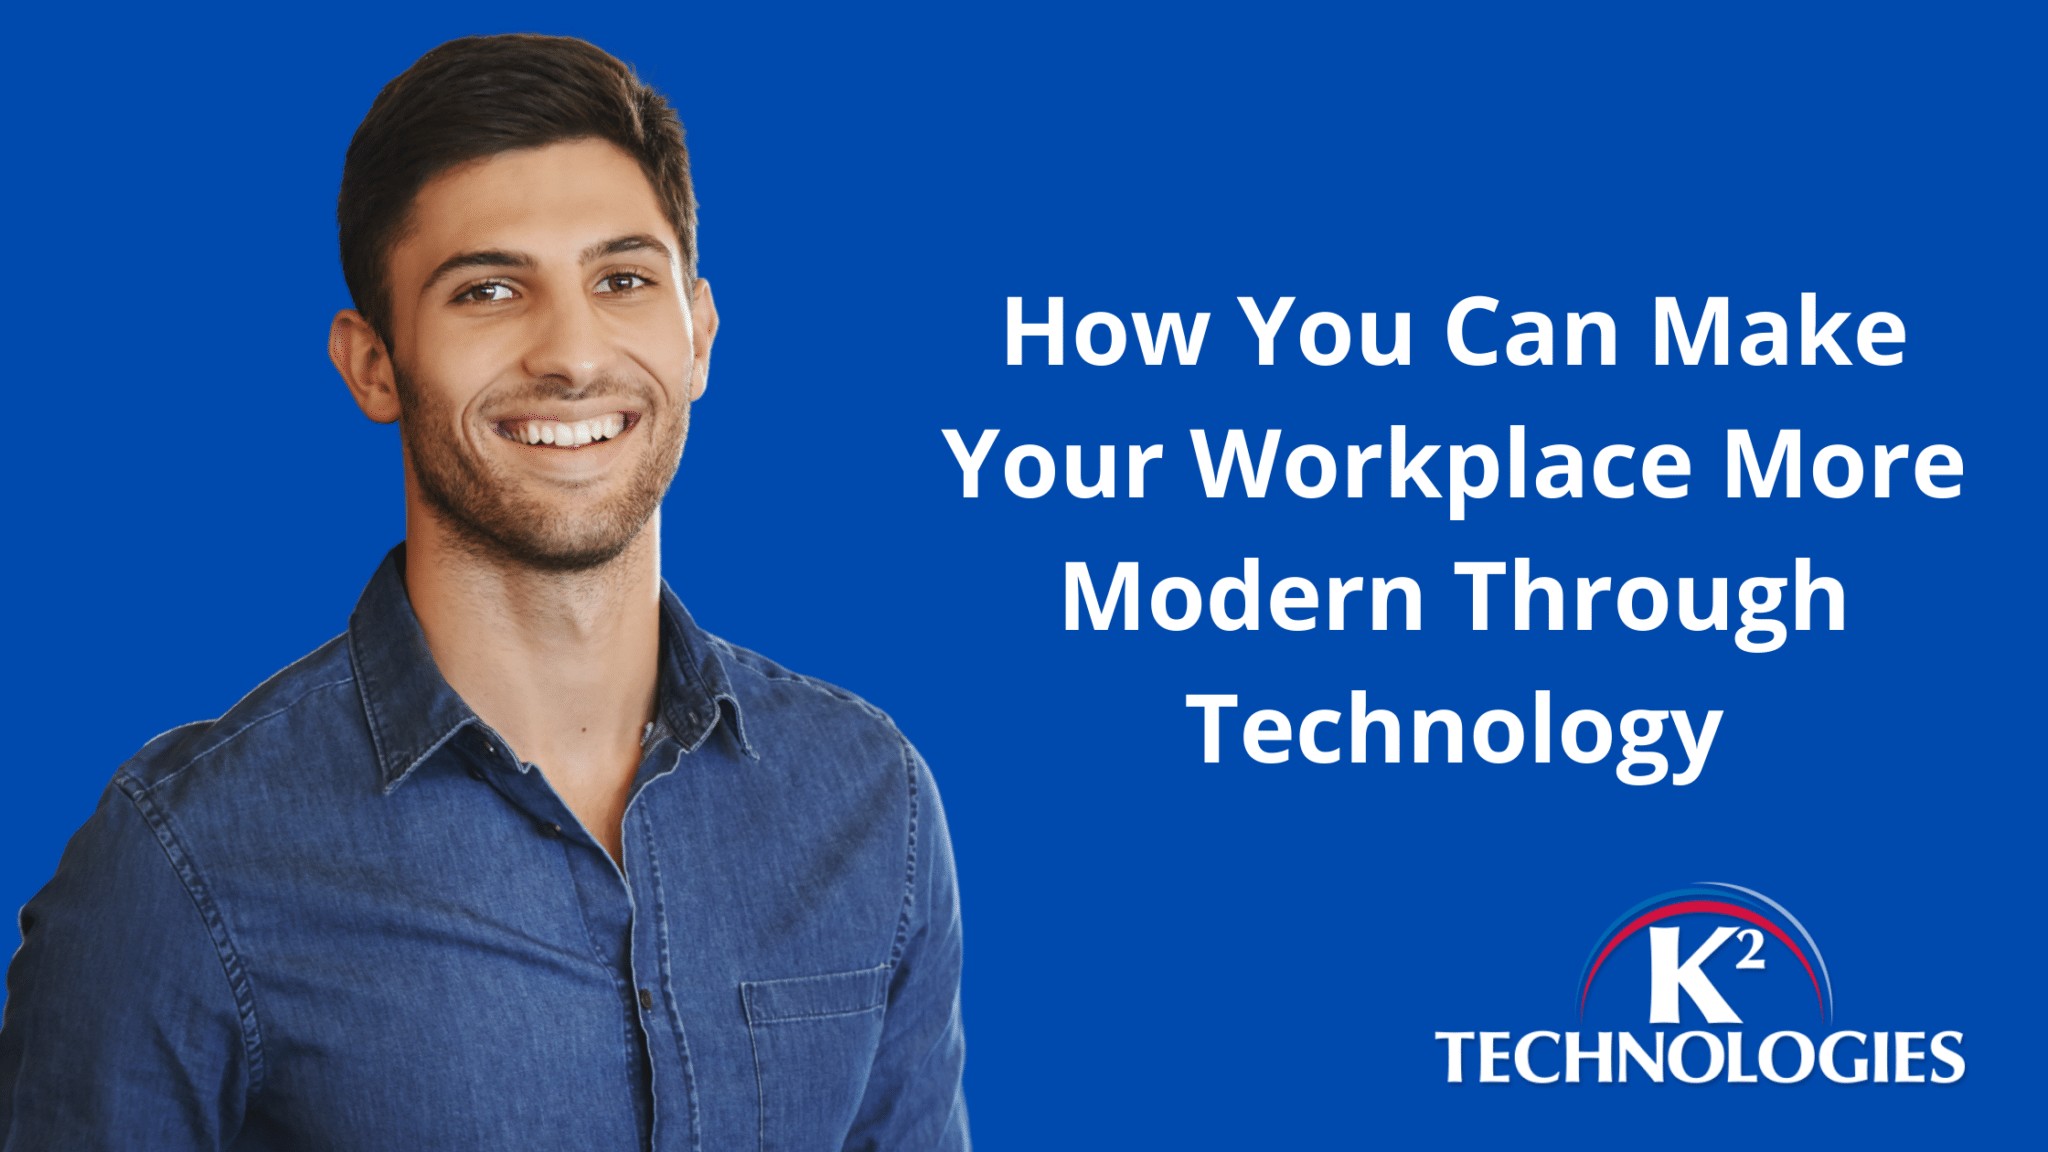 How You Can Make Your Workplace More Modern Through Technology